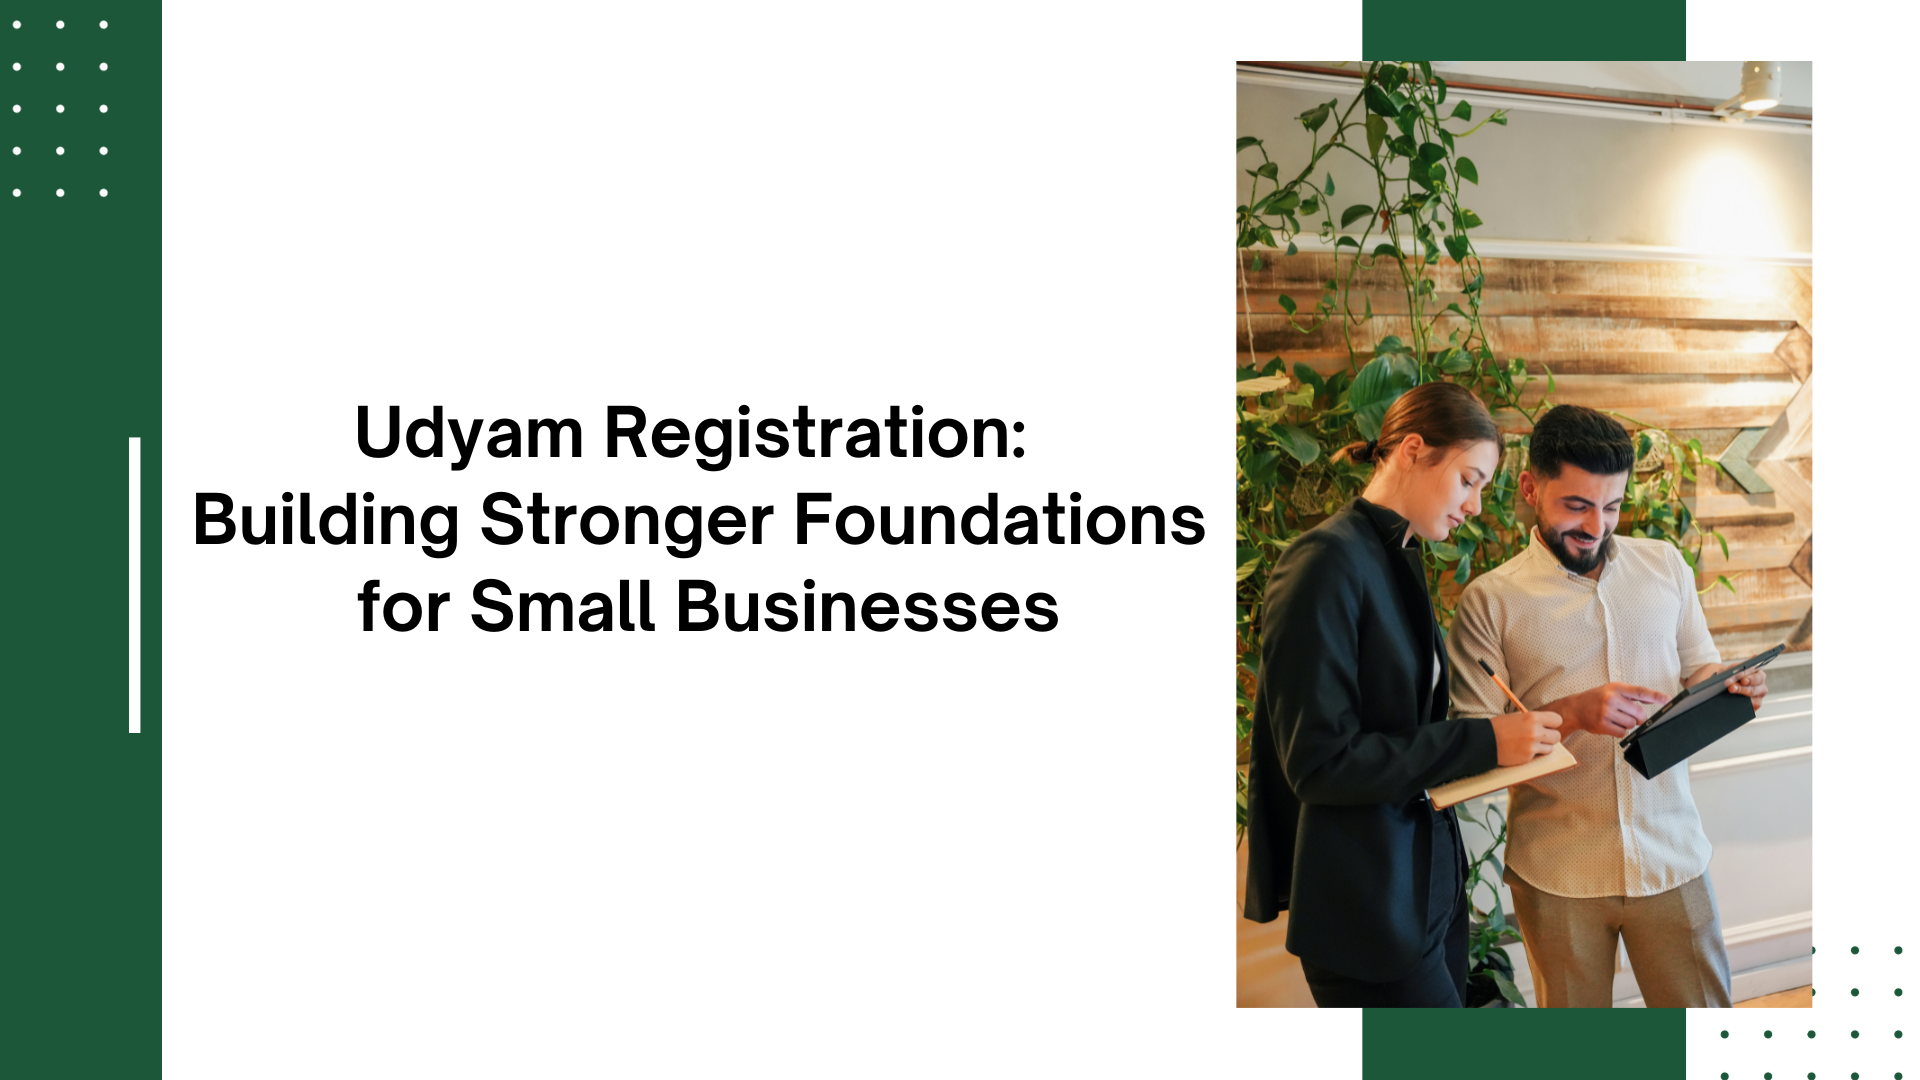 Udyam Registration: Building Stronger Foundations for Small Businesses